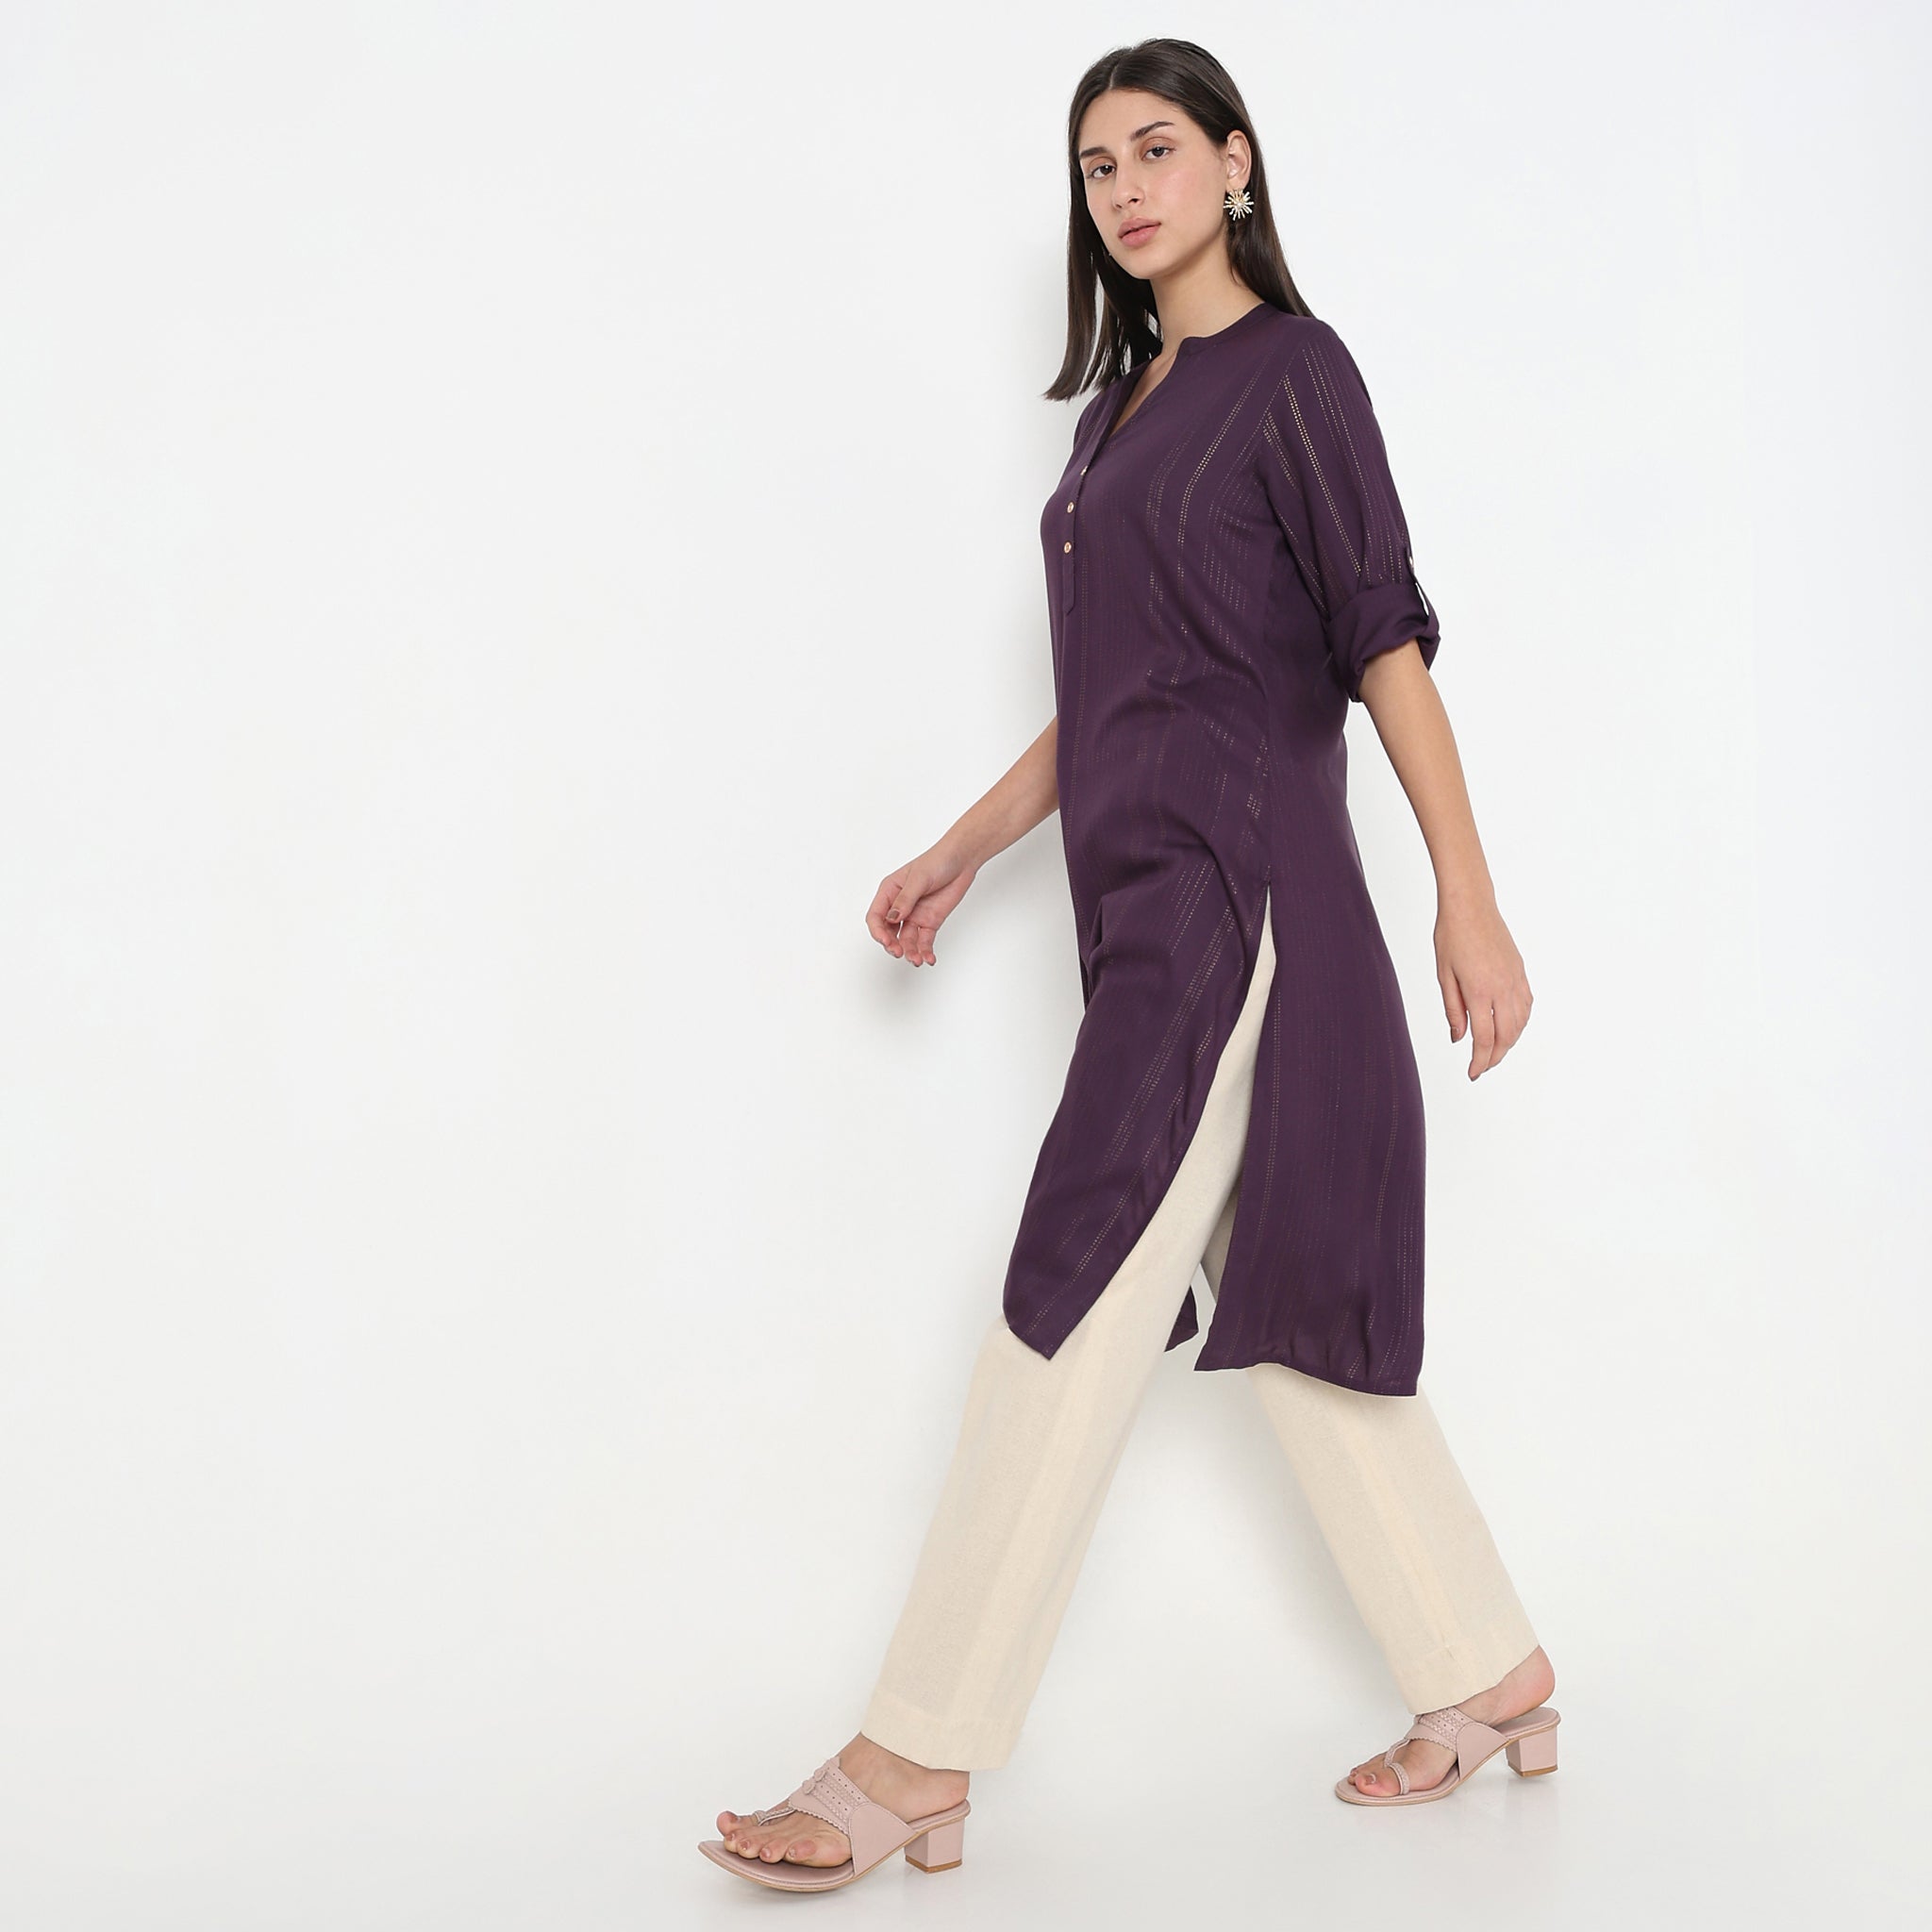 Redefined elegance with Zola's Timeless kurtis Collection: